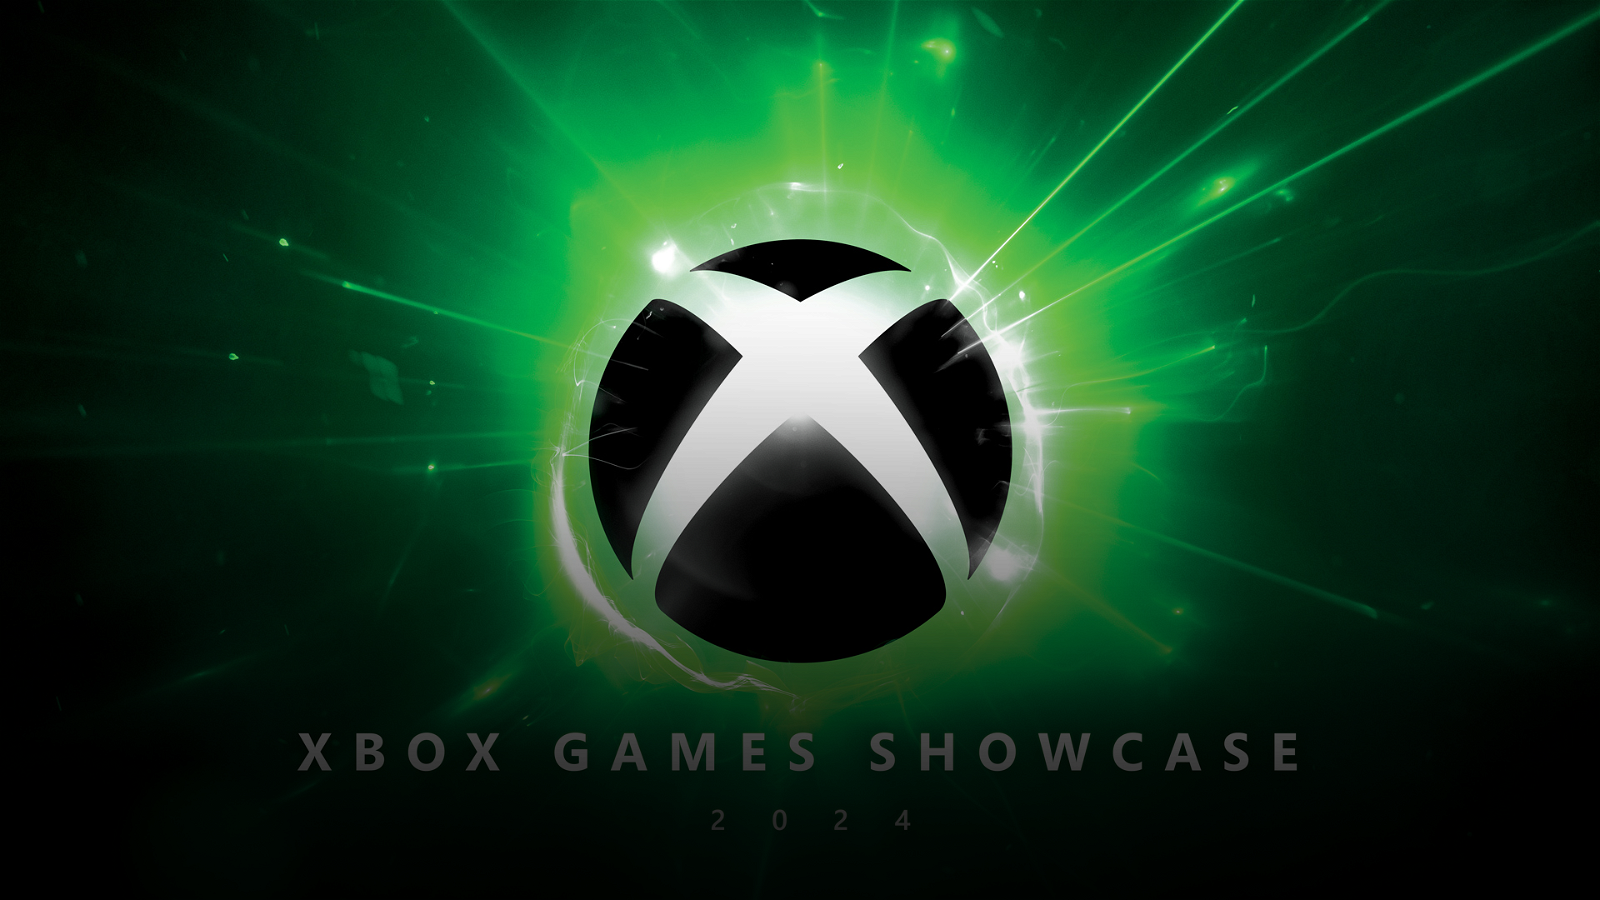 Xbox Games Showcase: All the Major Reveals Ranked, From Worst to the Best